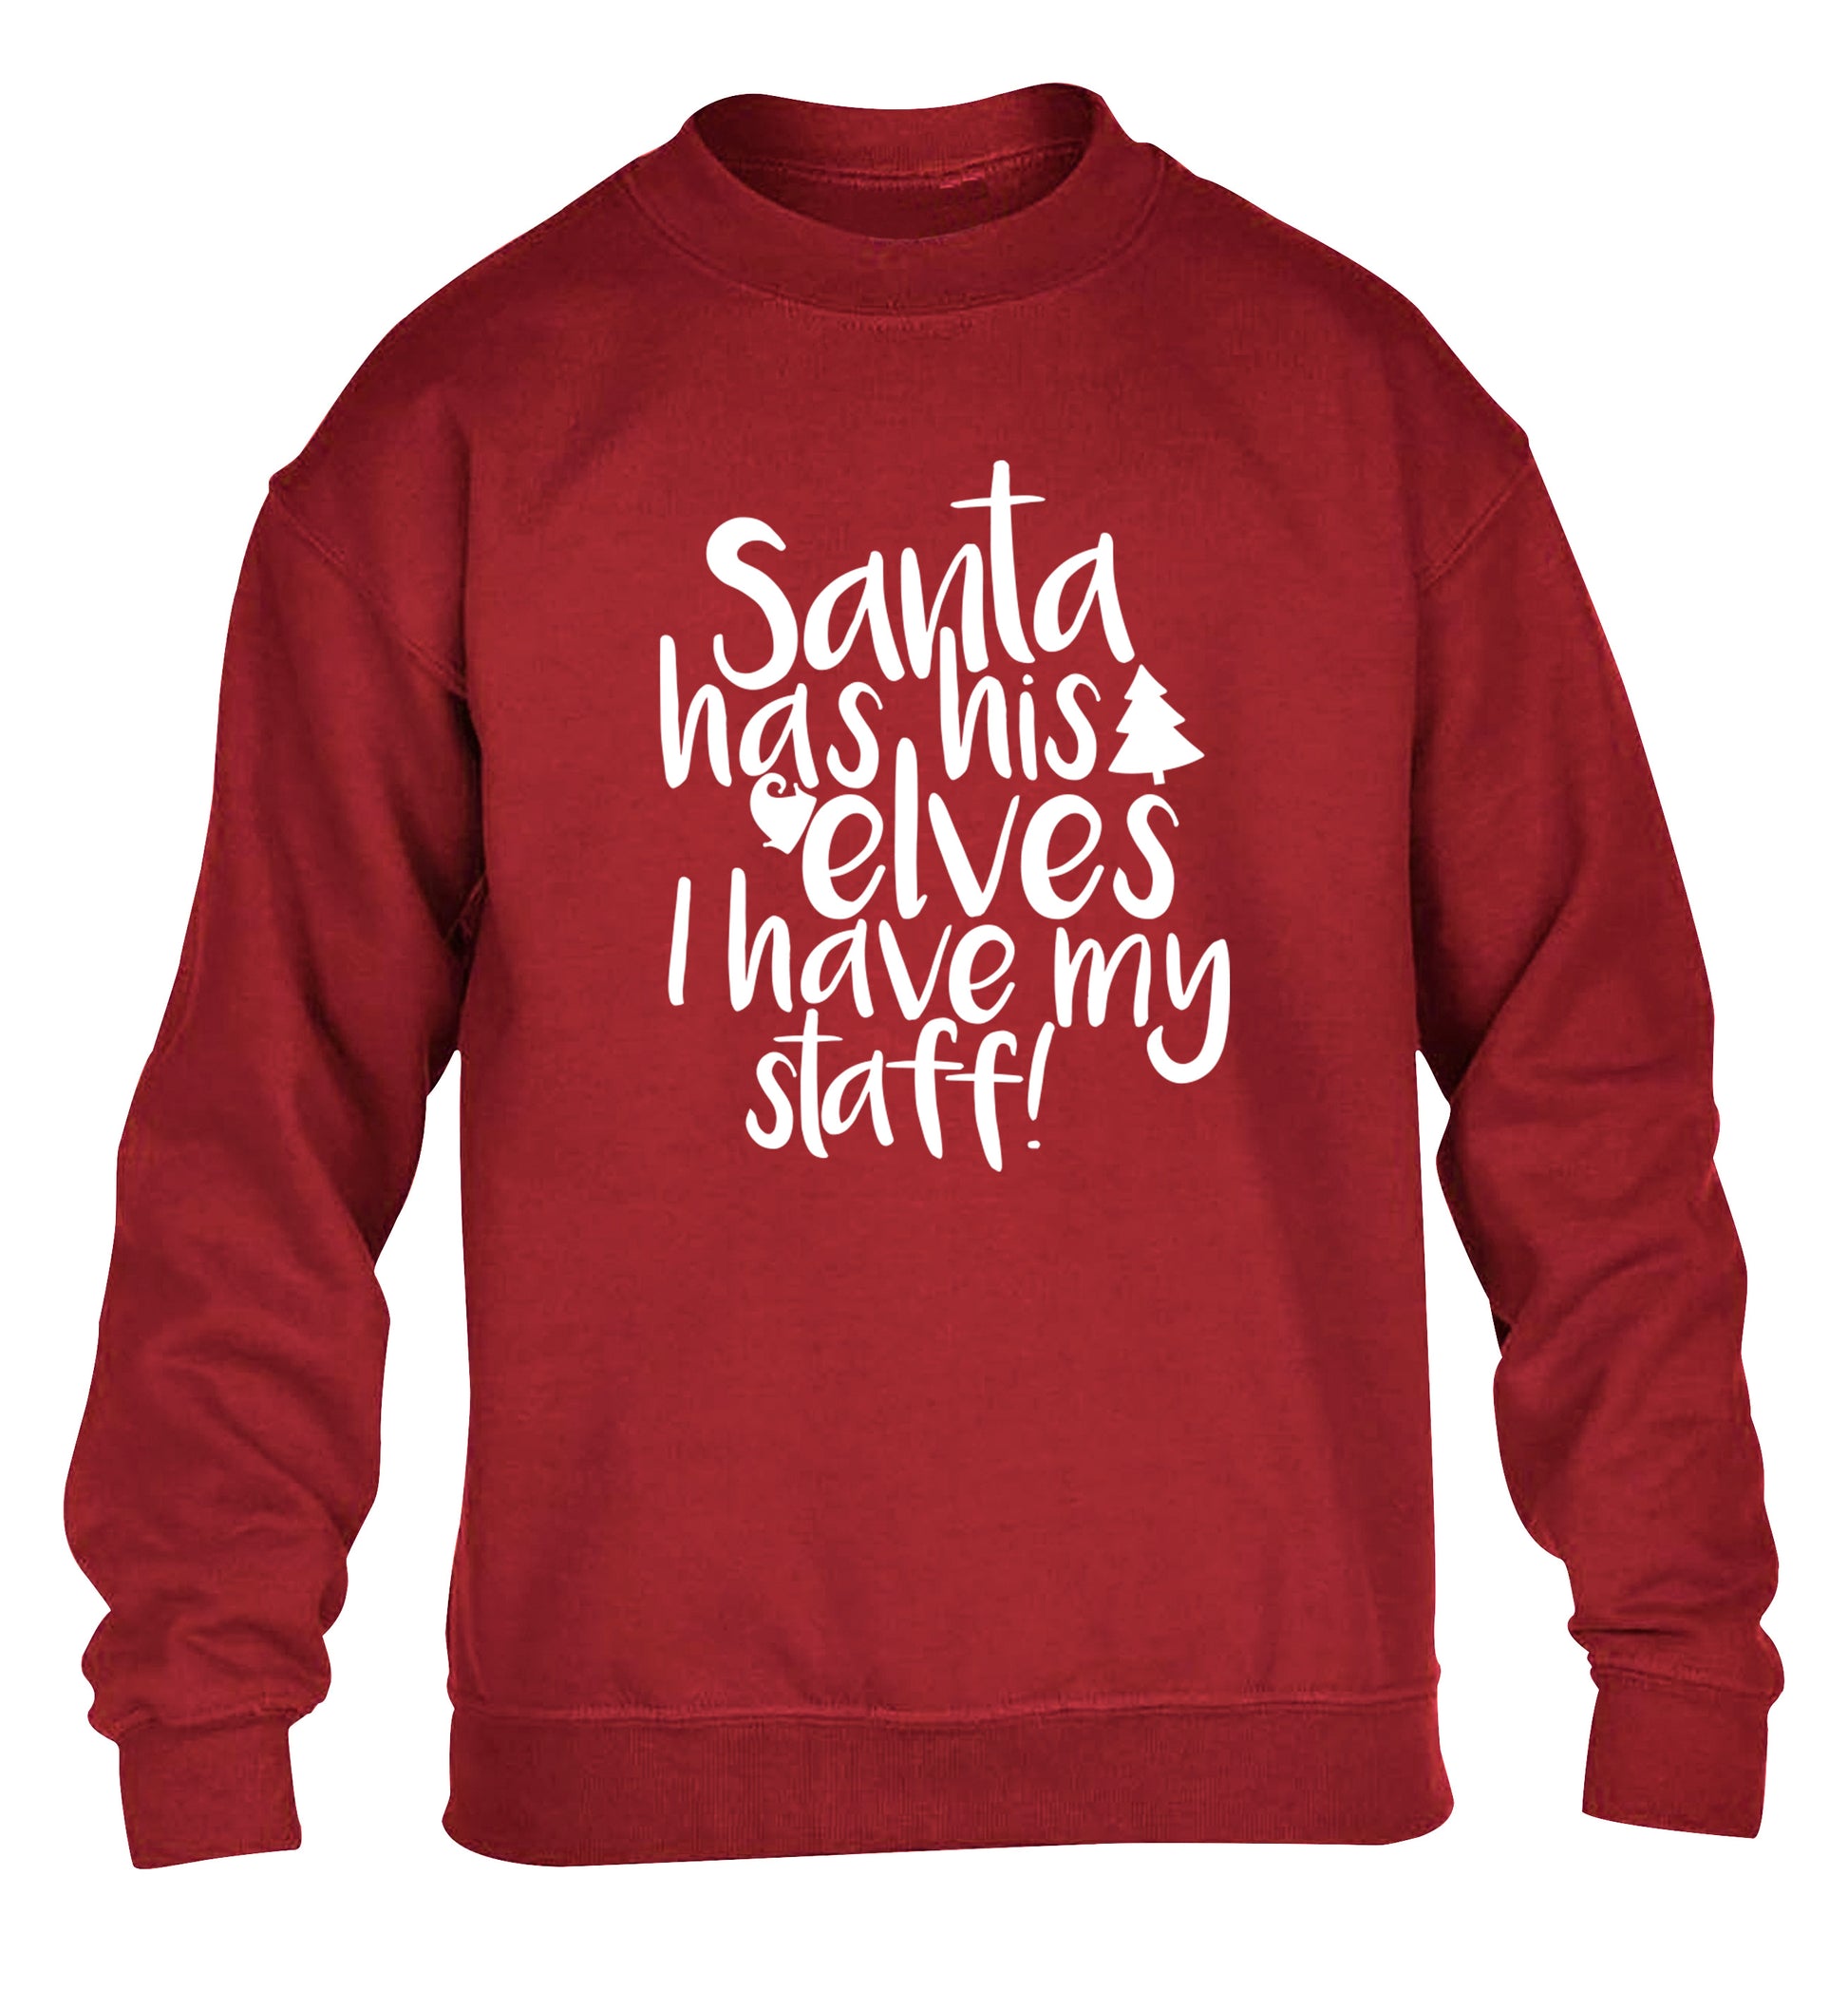 Santa has his elves I have my staff children's grey sweater 12-14 Years